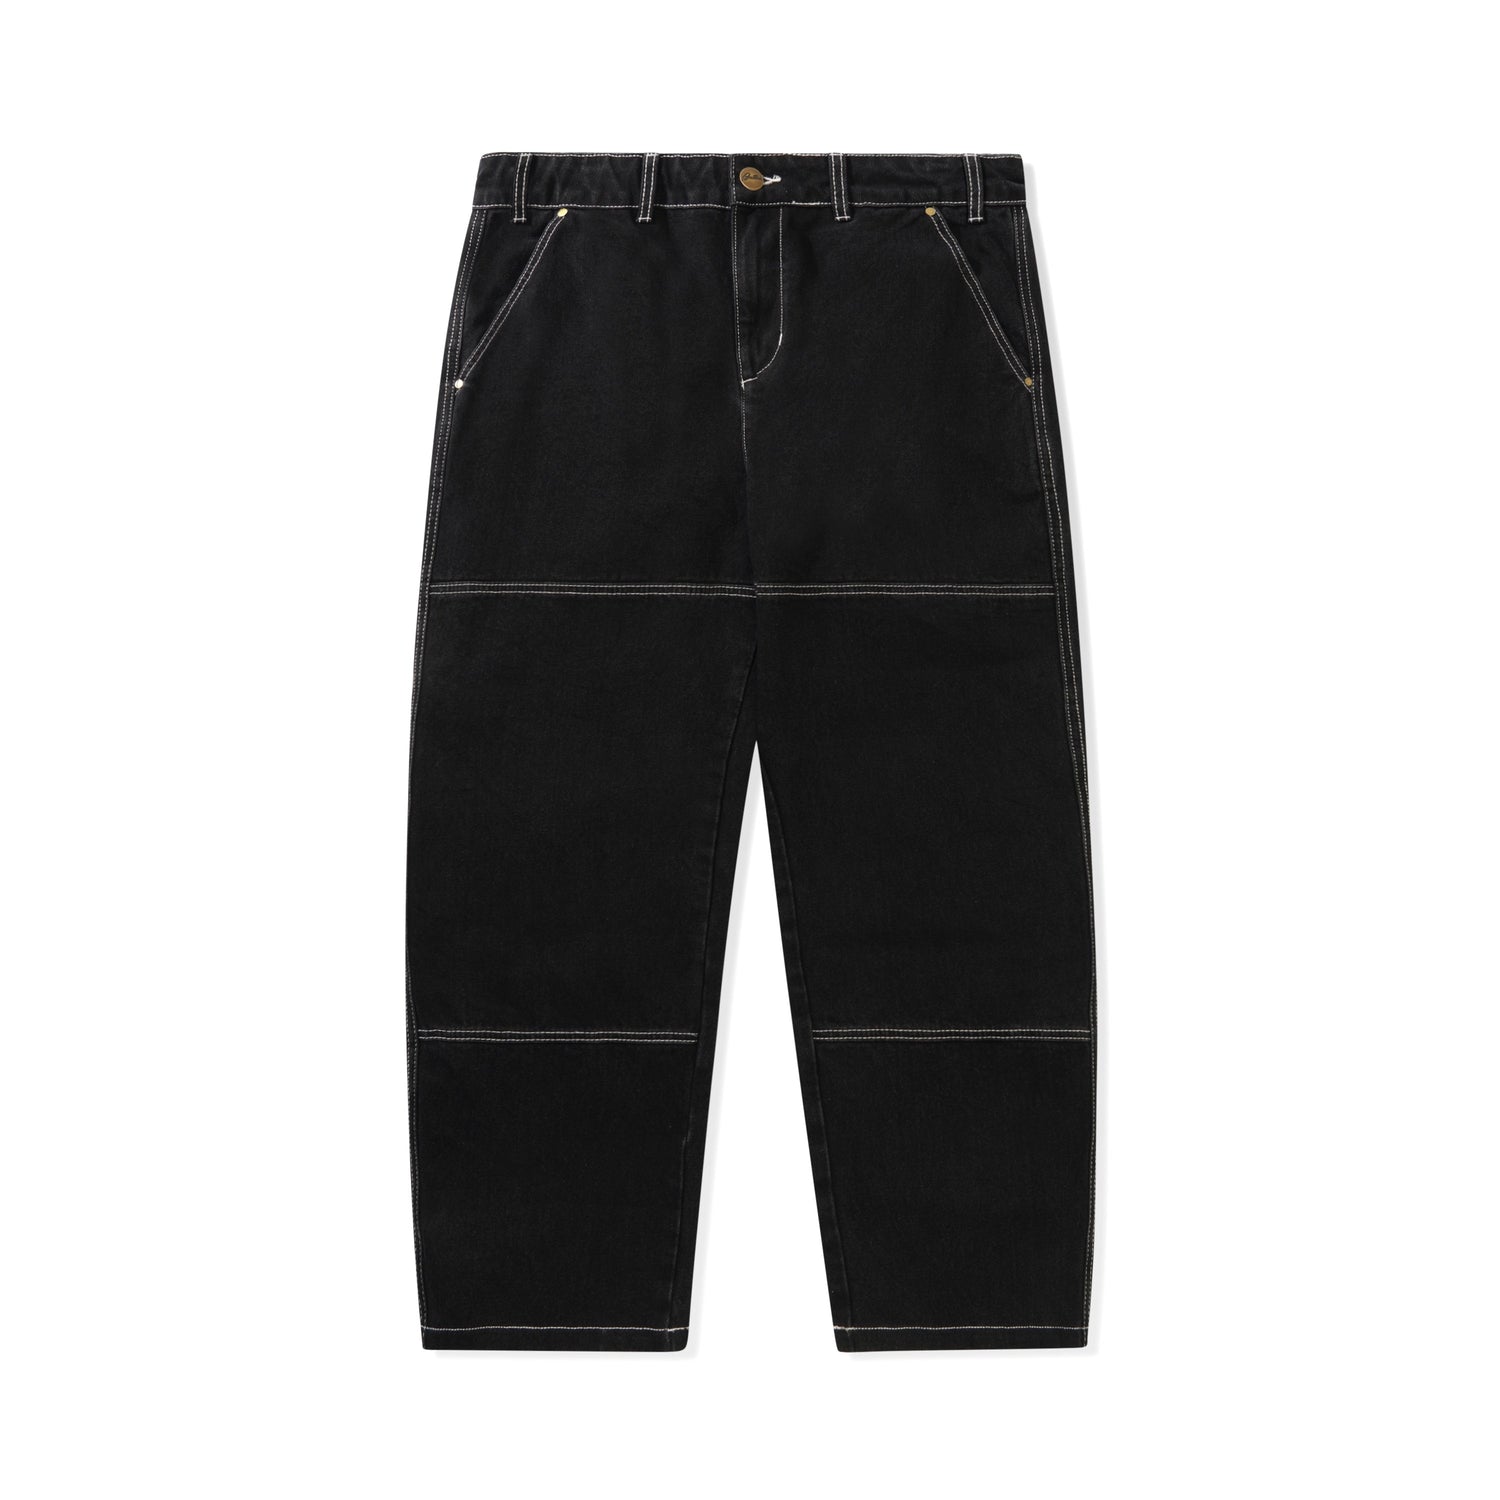 Work Double Knee Pants, Washed Black